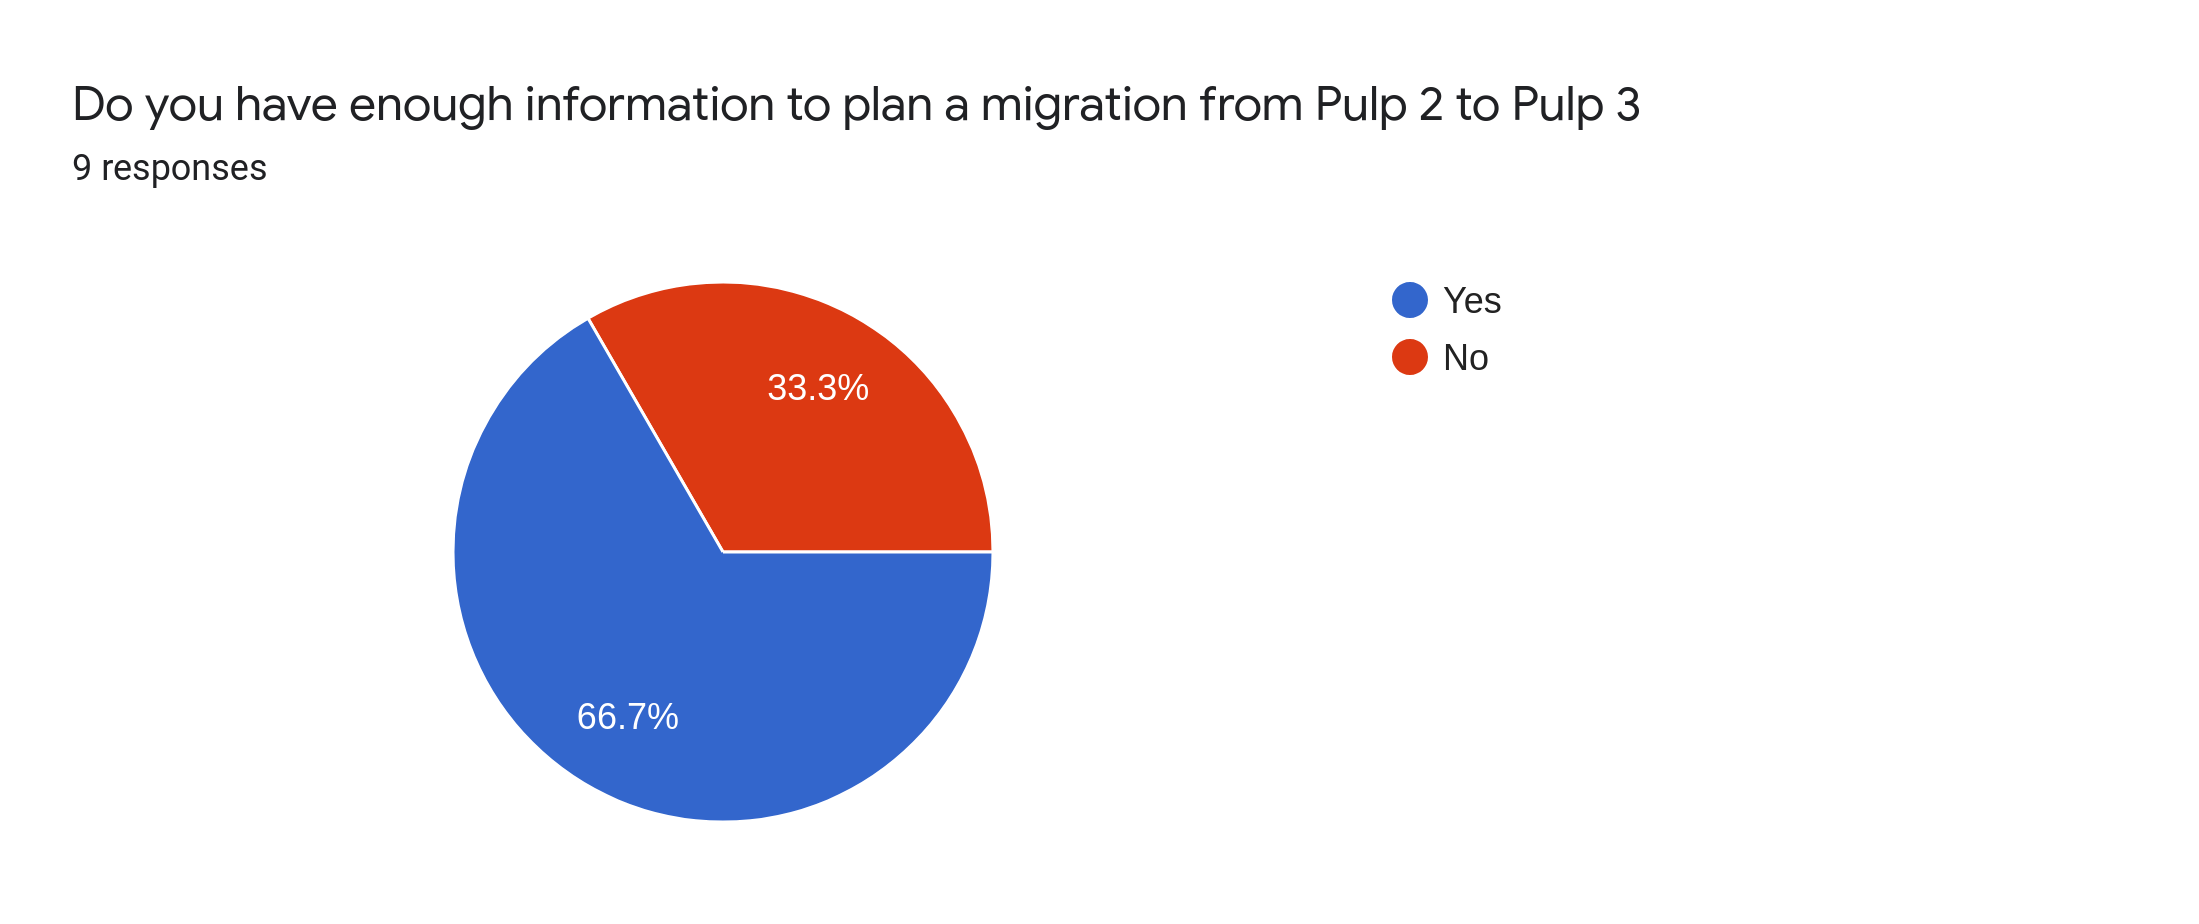 Do you have enough information to migrate from Pulp 2 to Pulp 3?